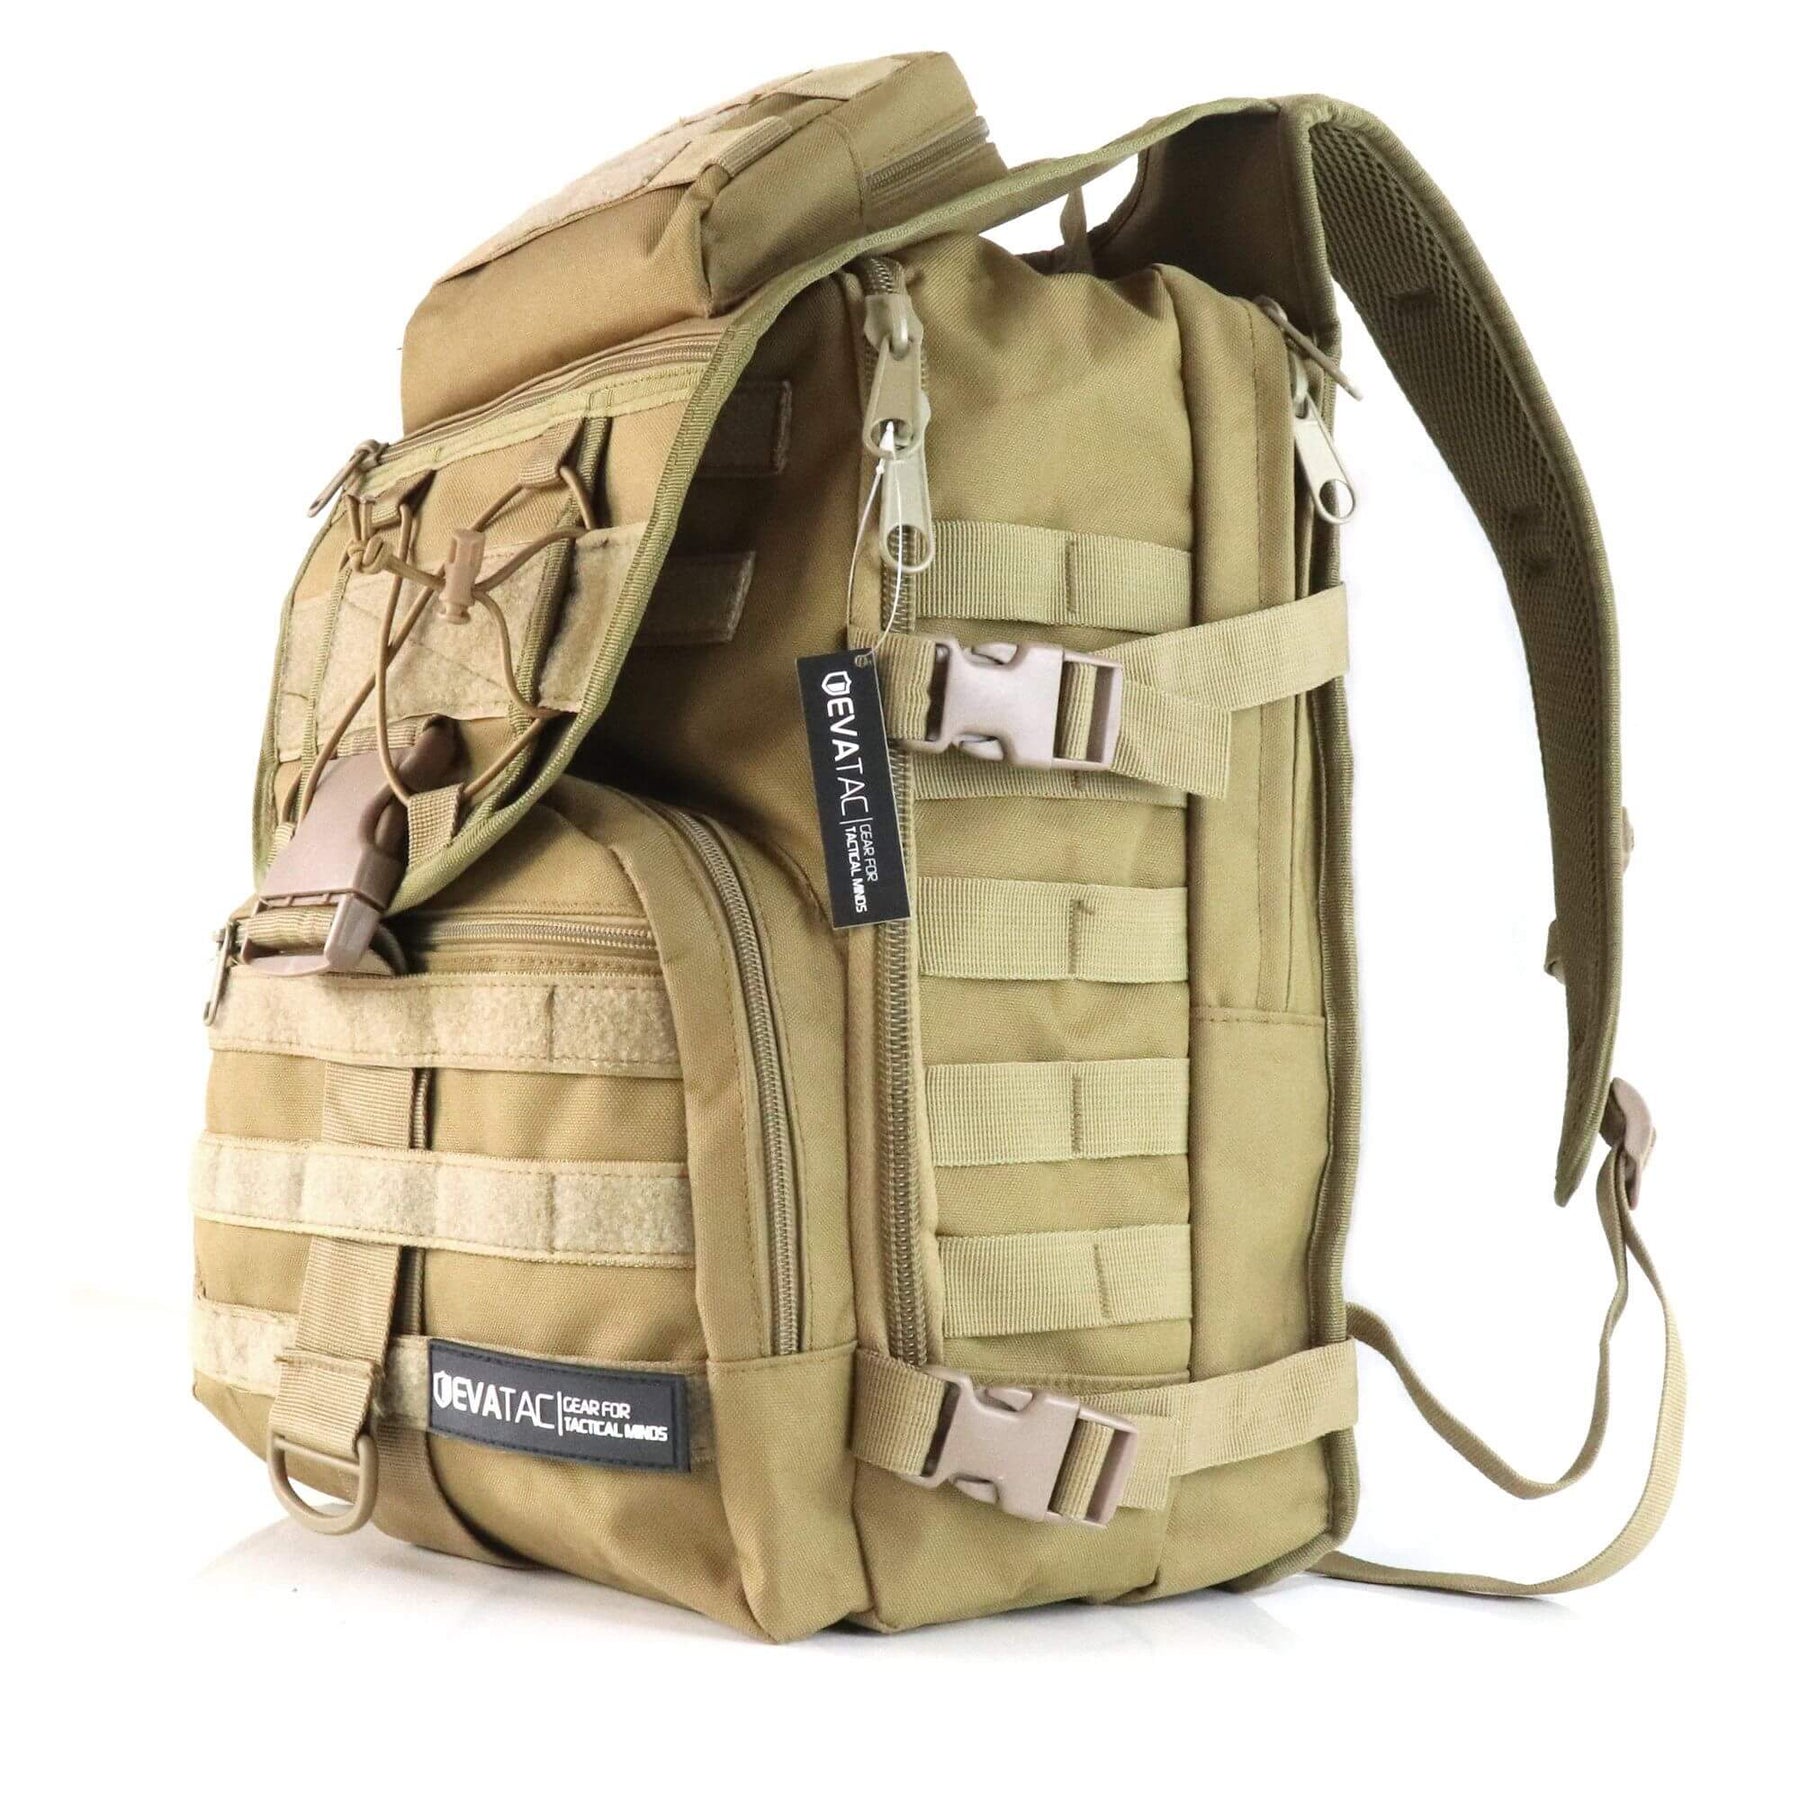 Amazon.com: M-Tac Tactical Large Backpack 36L - 3 Day Molle Military  Rucksack - Army Daypack Combat Bag (Coyote) : Sports & Outdoors